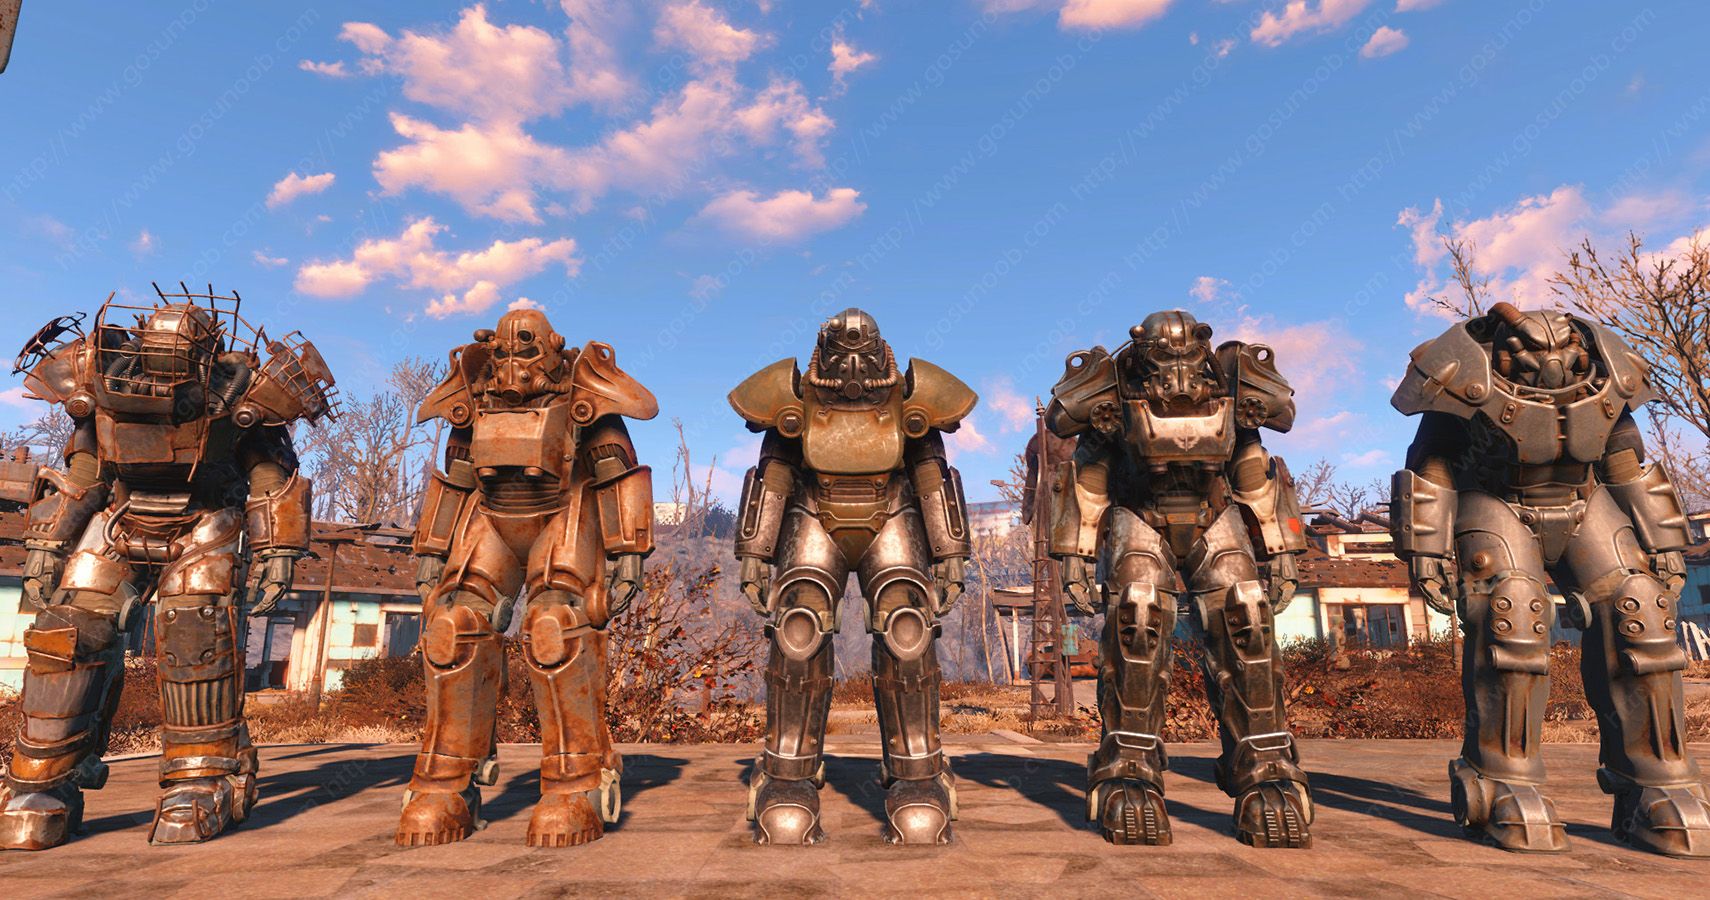 where to get good power suite fallout 4